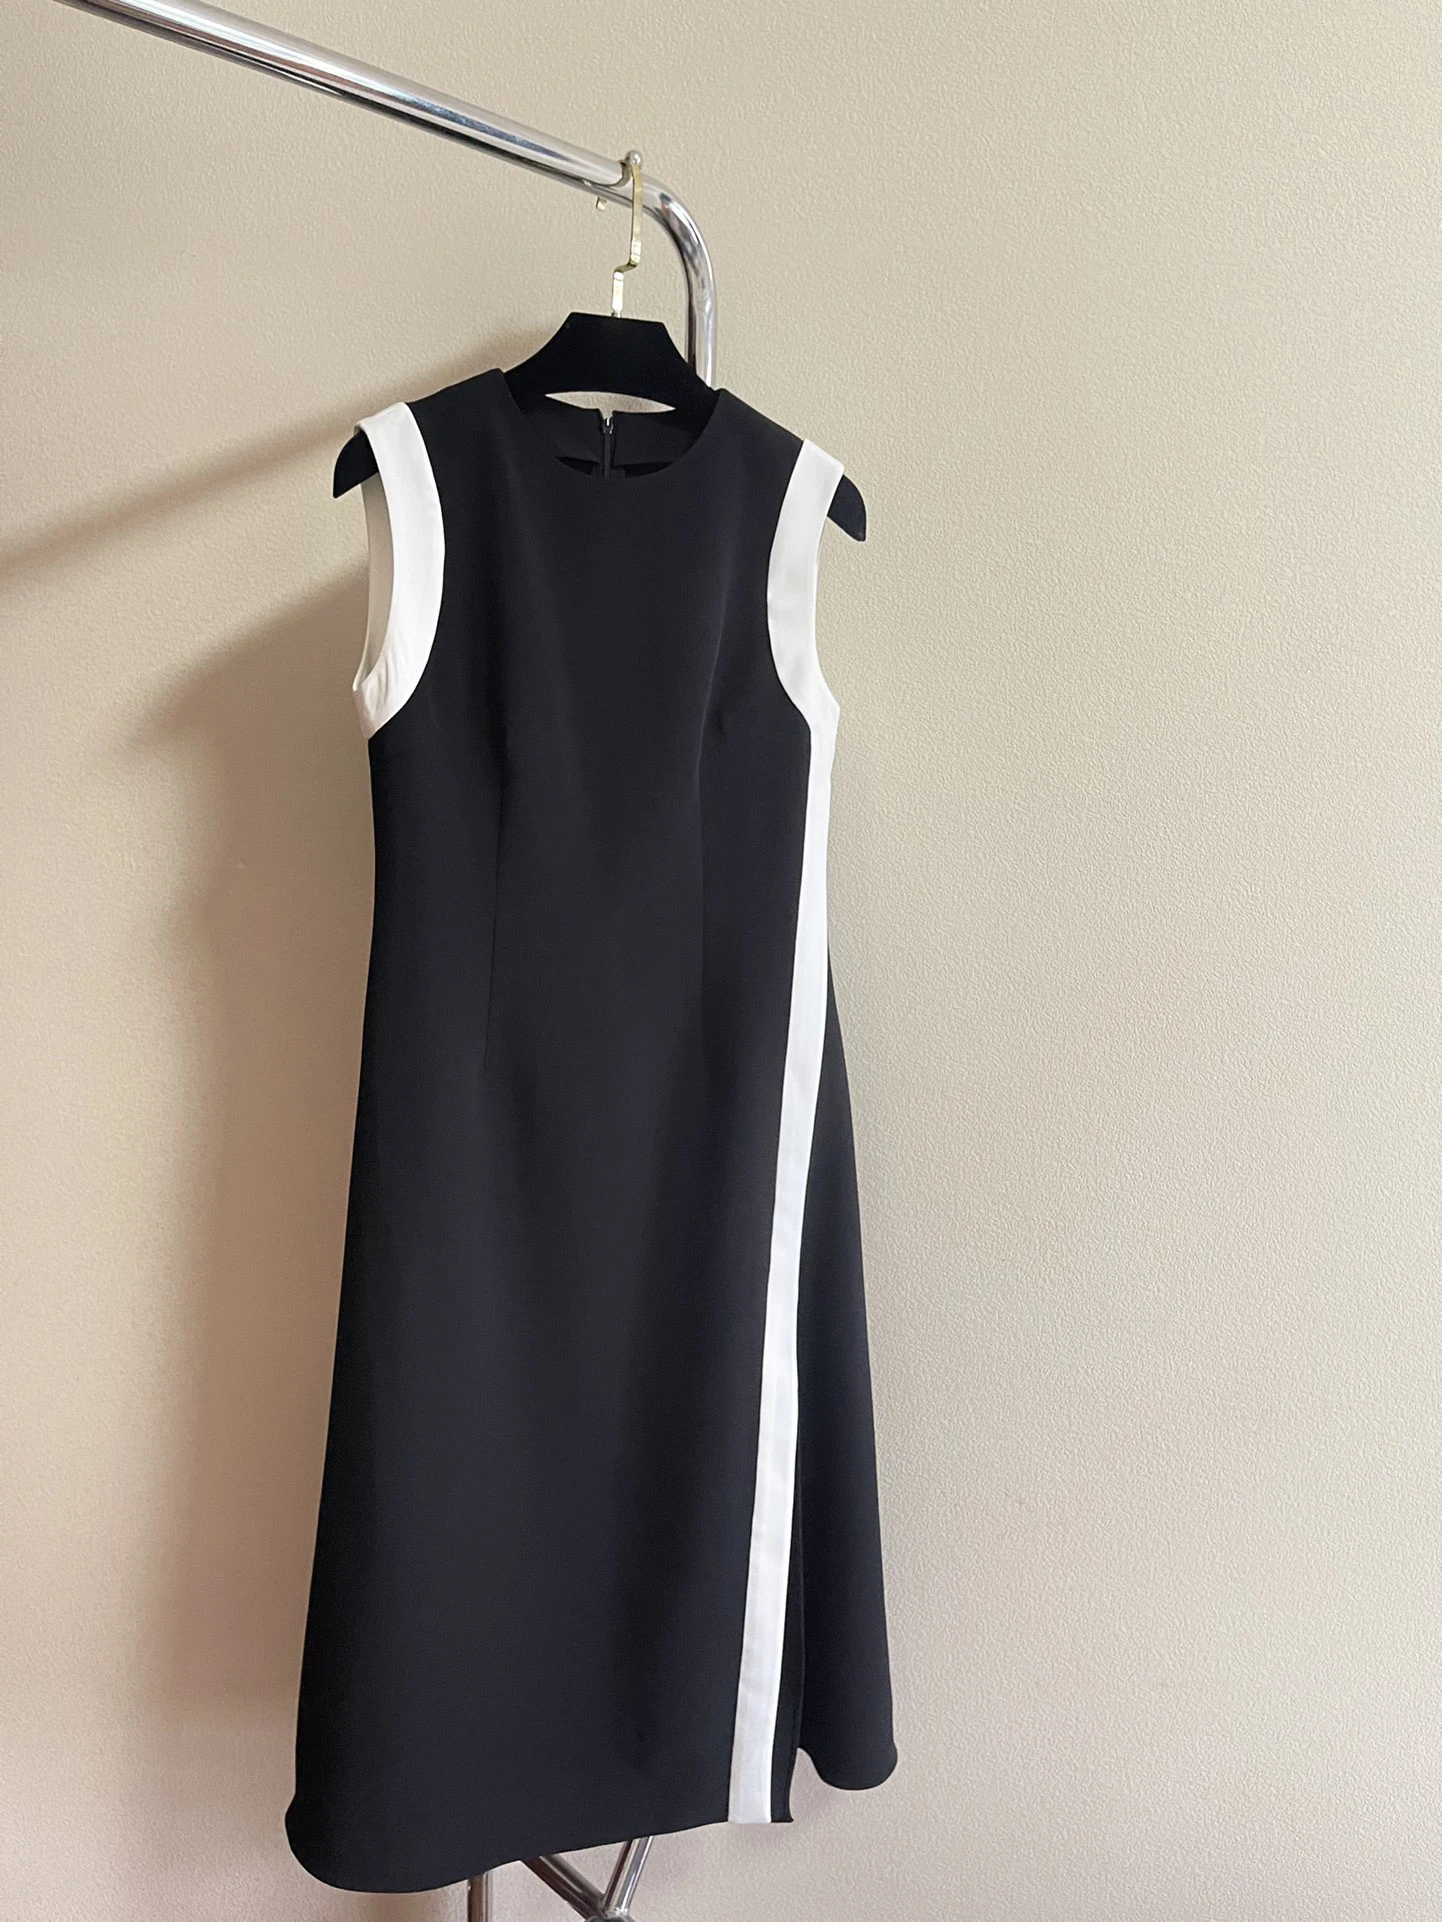 Spring and summer sleeveless dress clever black and white stitching simplicity add a of elegant minimalist senior blend